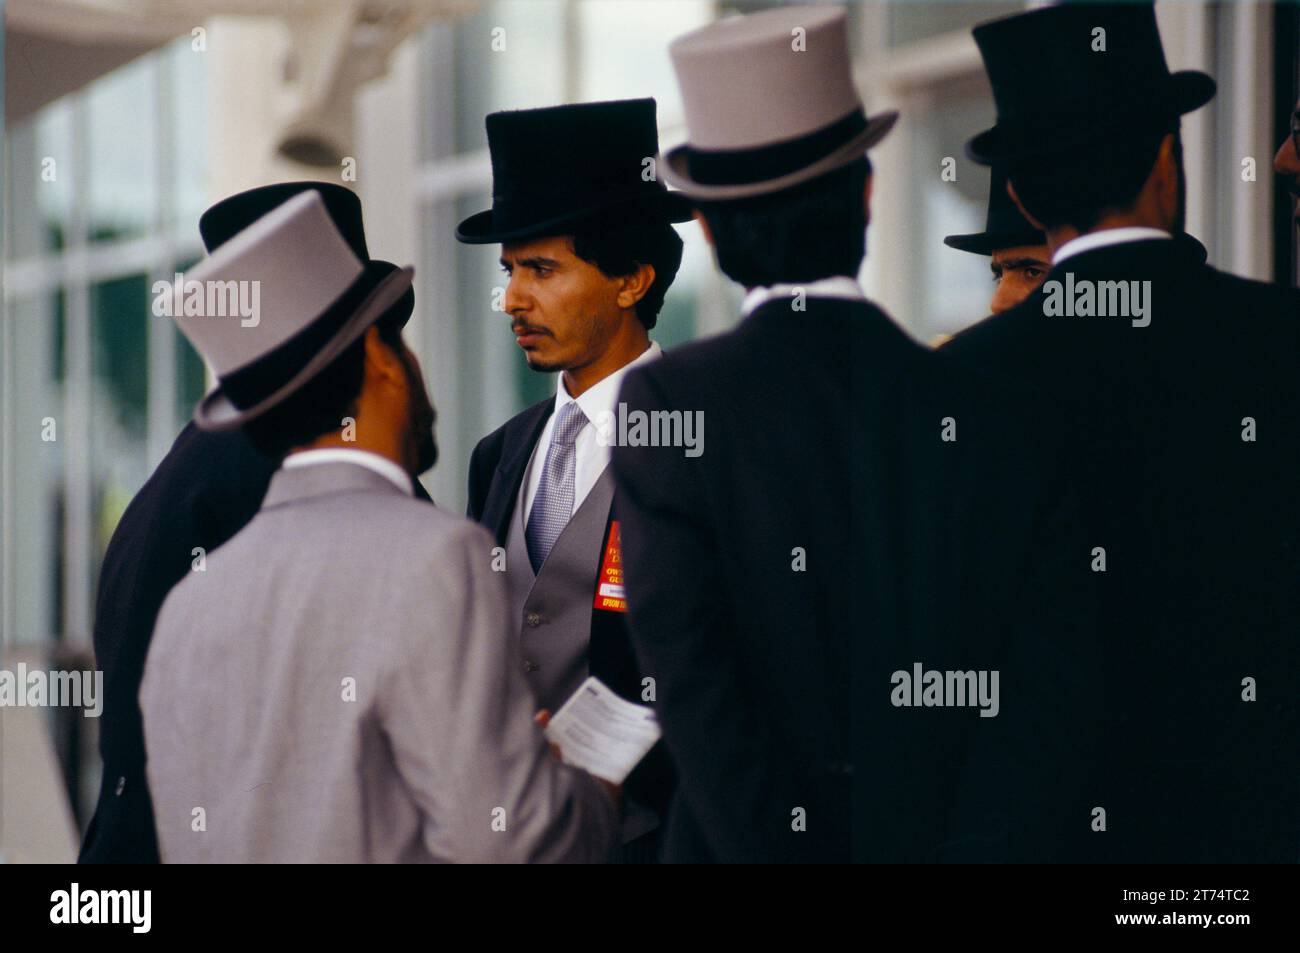 Arab men in western dress top hat and tails coats who are all part of Sheikh Mohammed Al Maktoum entourage horse racing at Royal Ascot in the Members Enclosure. Berkshire  England circa June 1983. 1980s UK HOMER SYKES Stock Photo